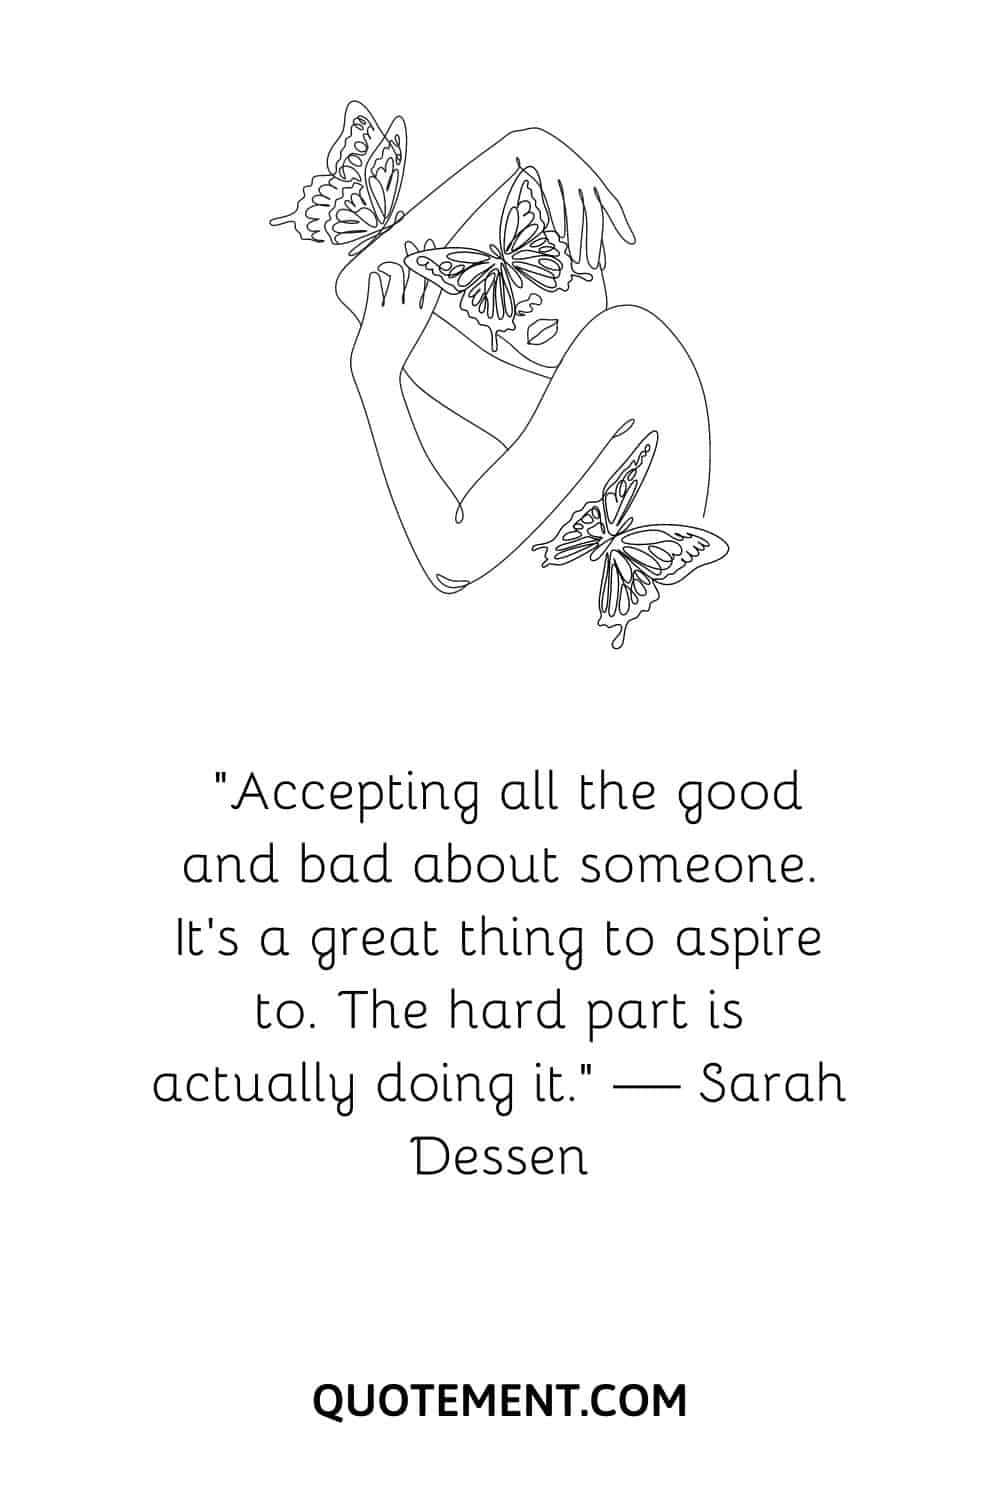 “Accepting all the good and bad about someone. It’s a great thing to aspire to. The hard part is actually doing it.” — Sarah Dessen